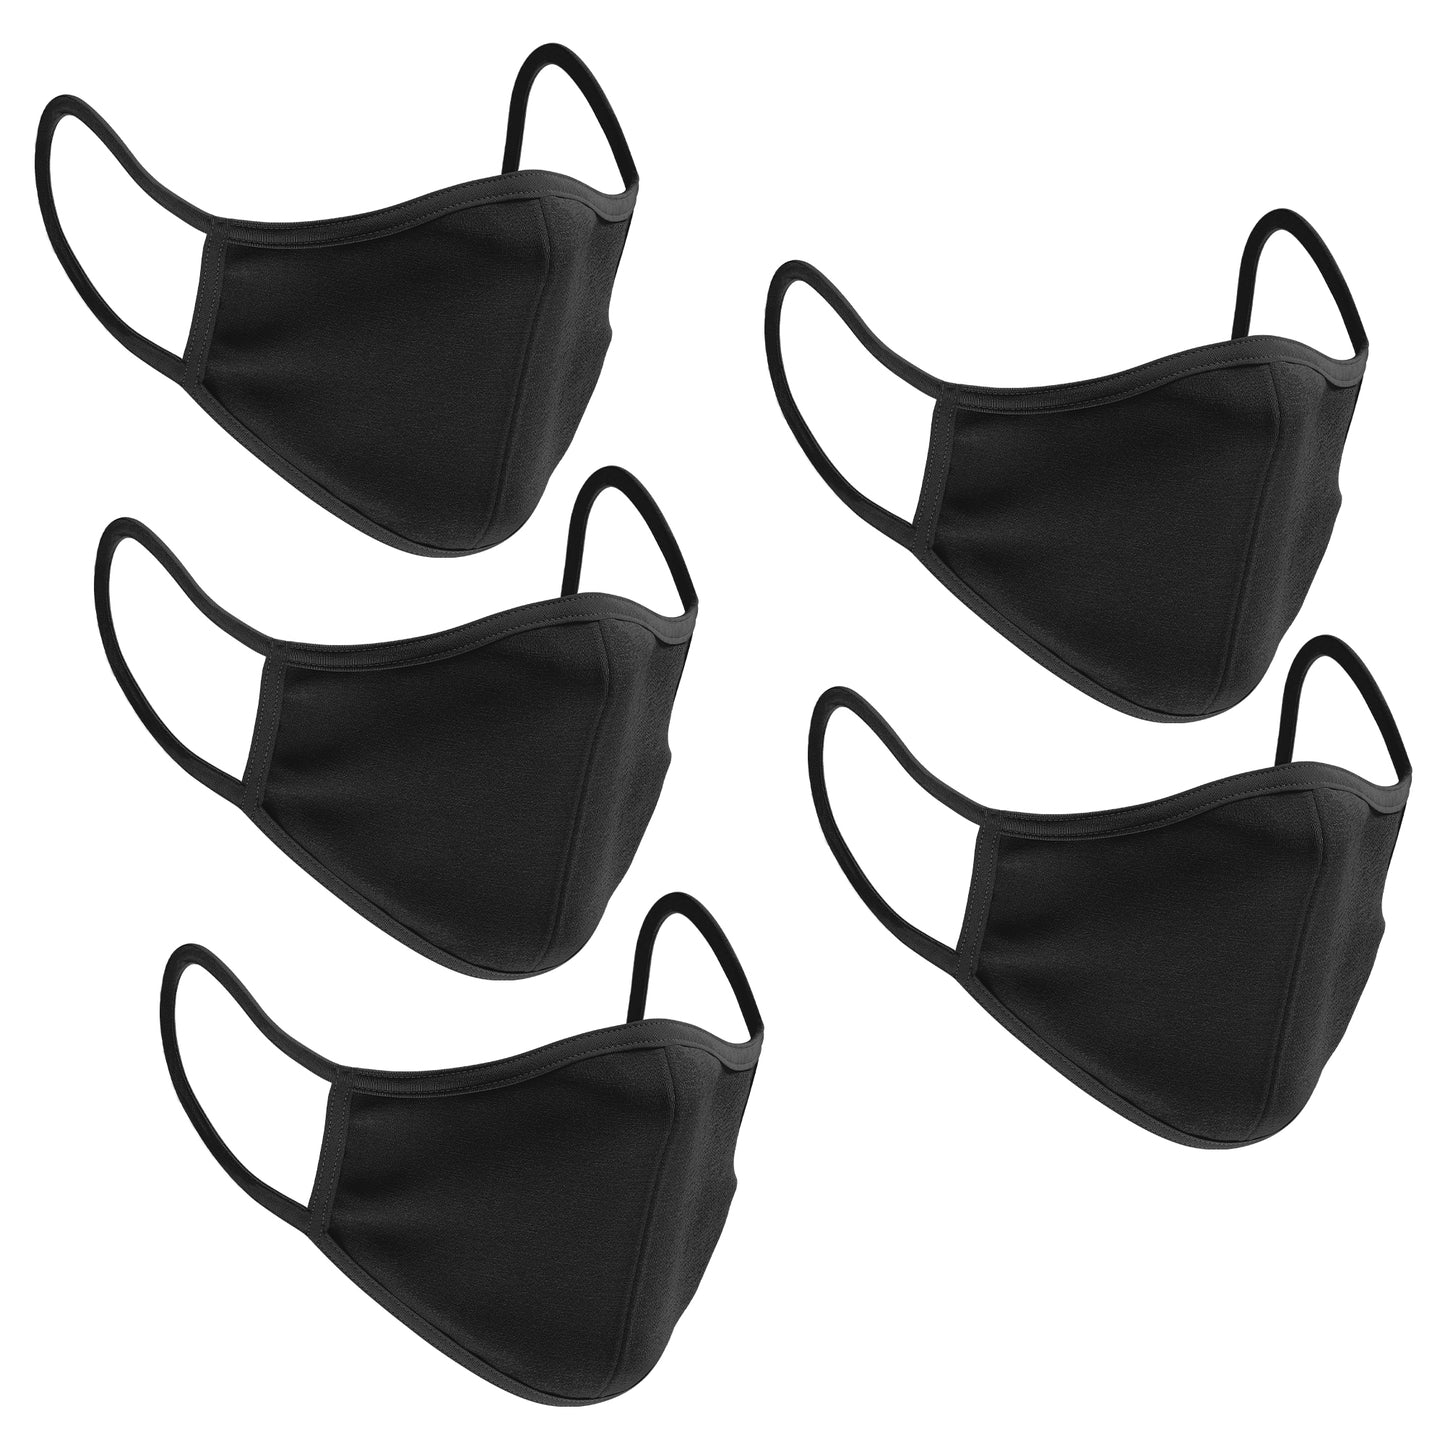 Pack of 5 - Black Double Layer Fabric Cotton Reusable Face Mask